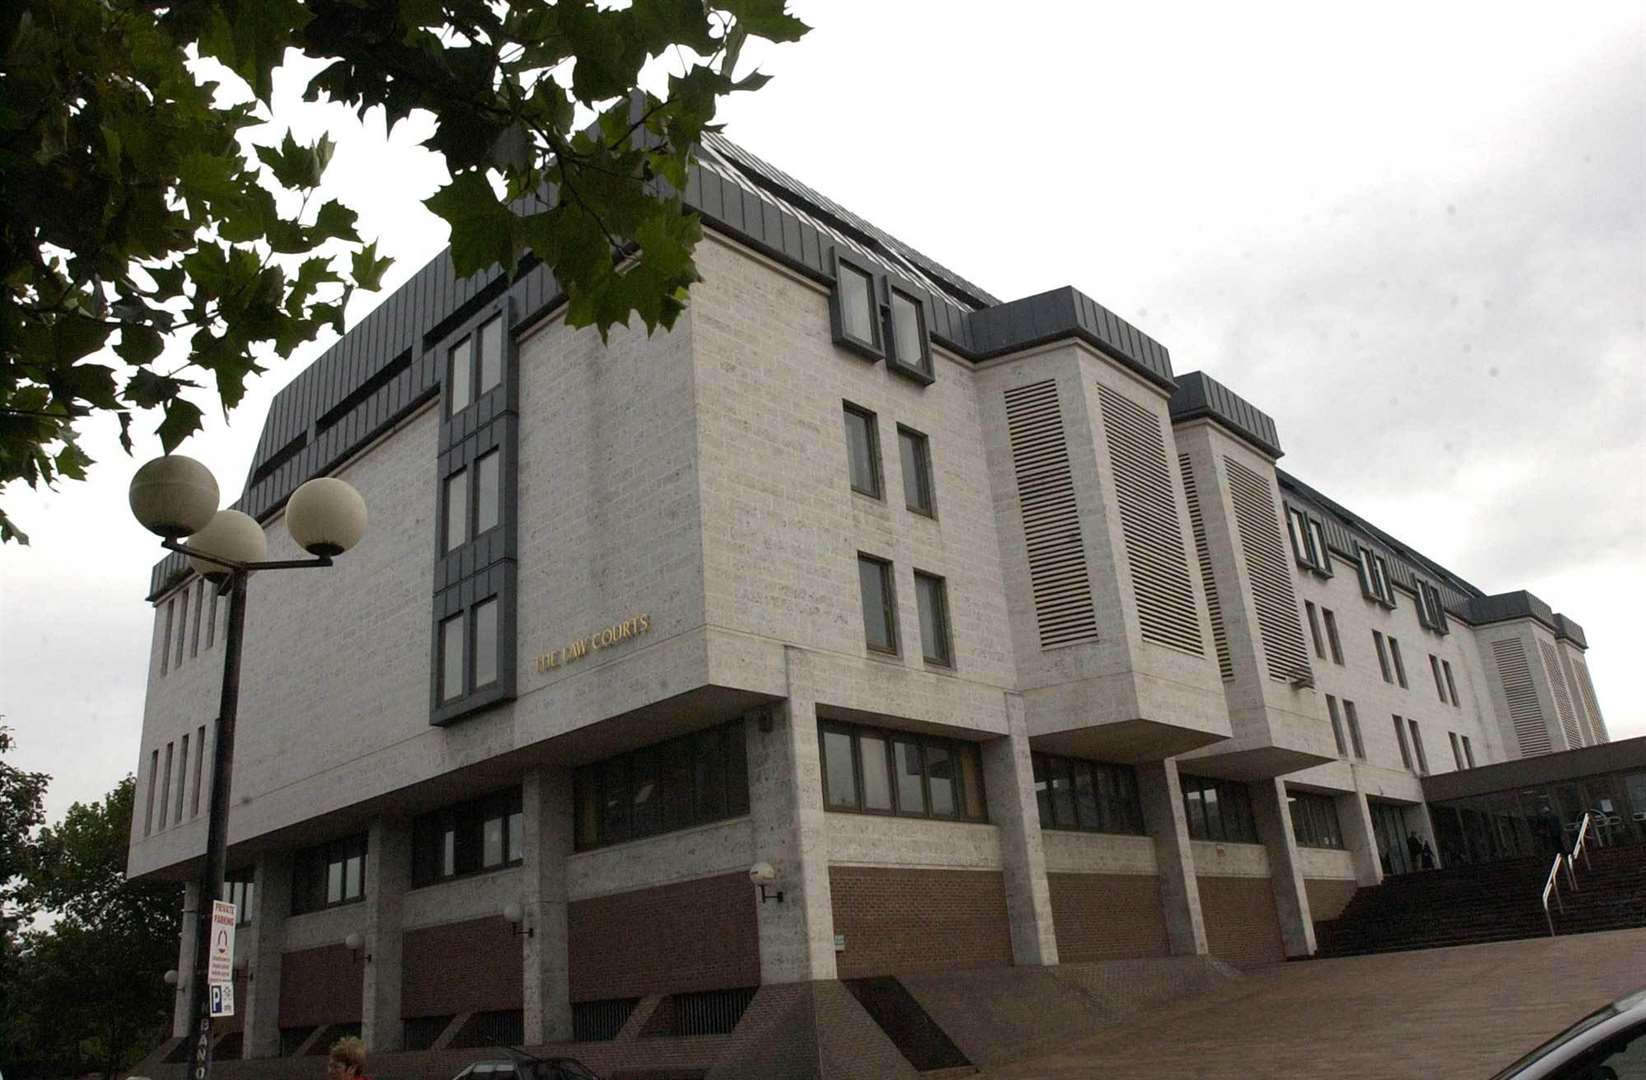 The Queen opened Maidstone Crown Court in 1984